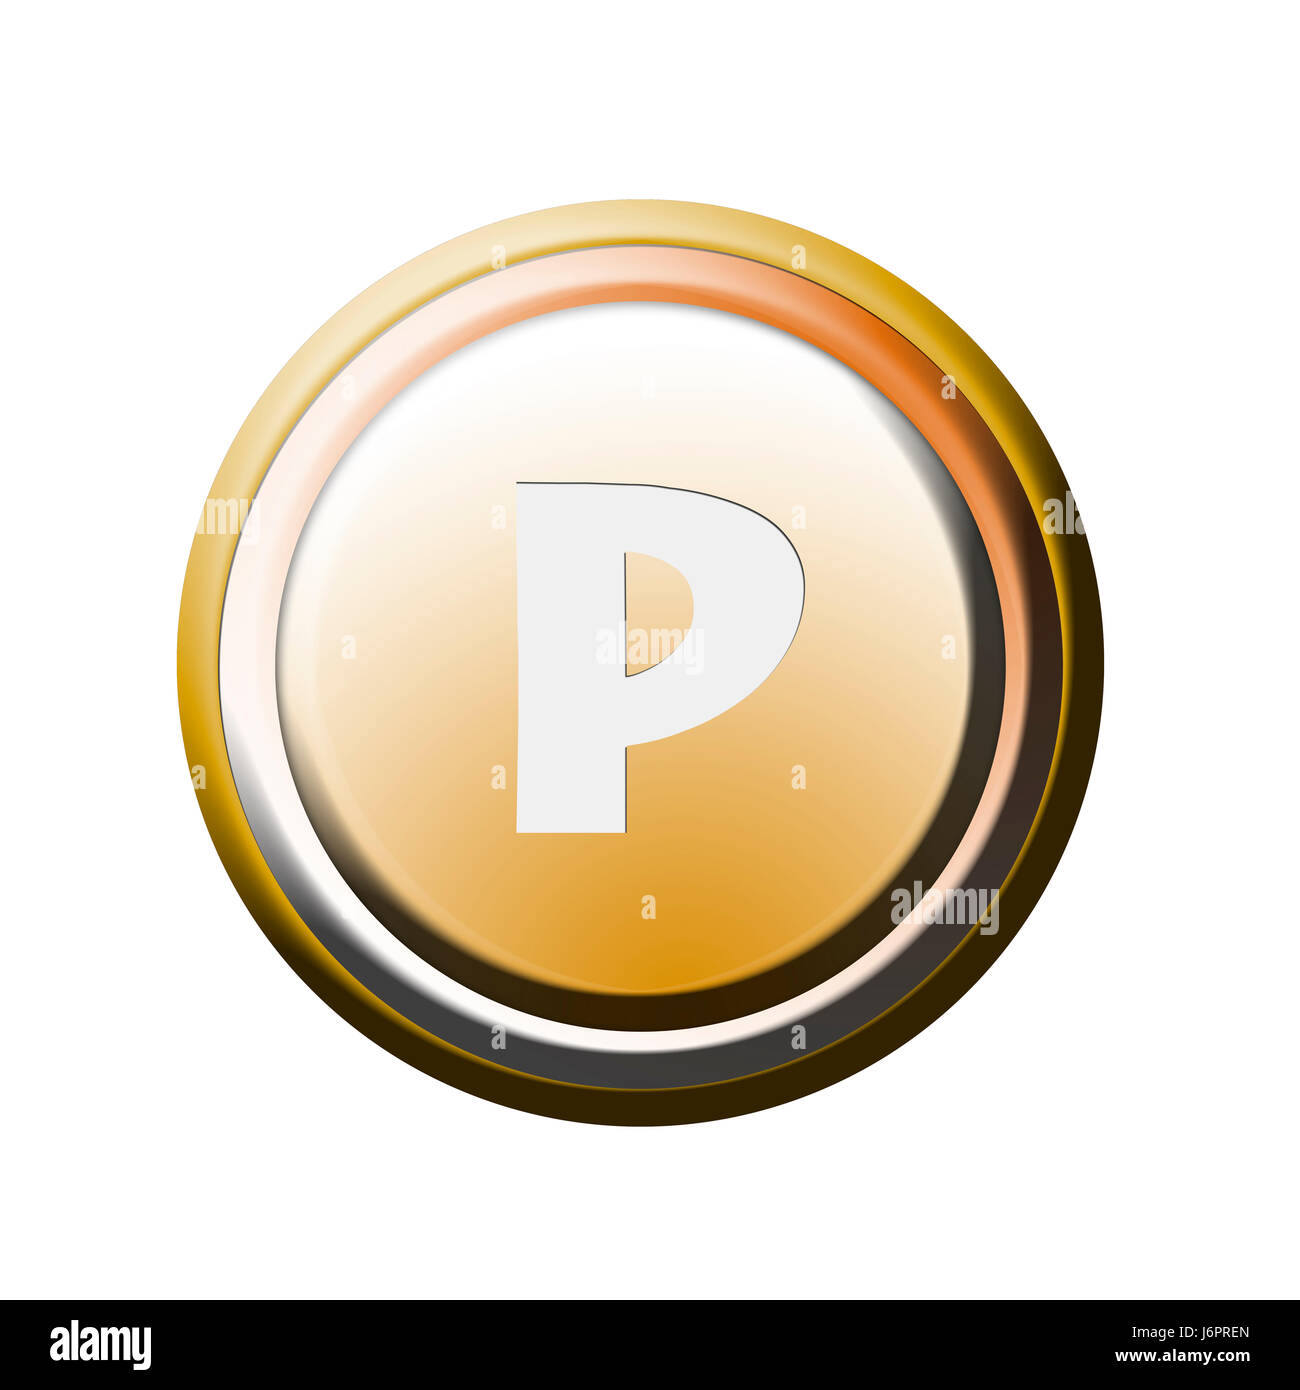 button with letter p Stock Photo